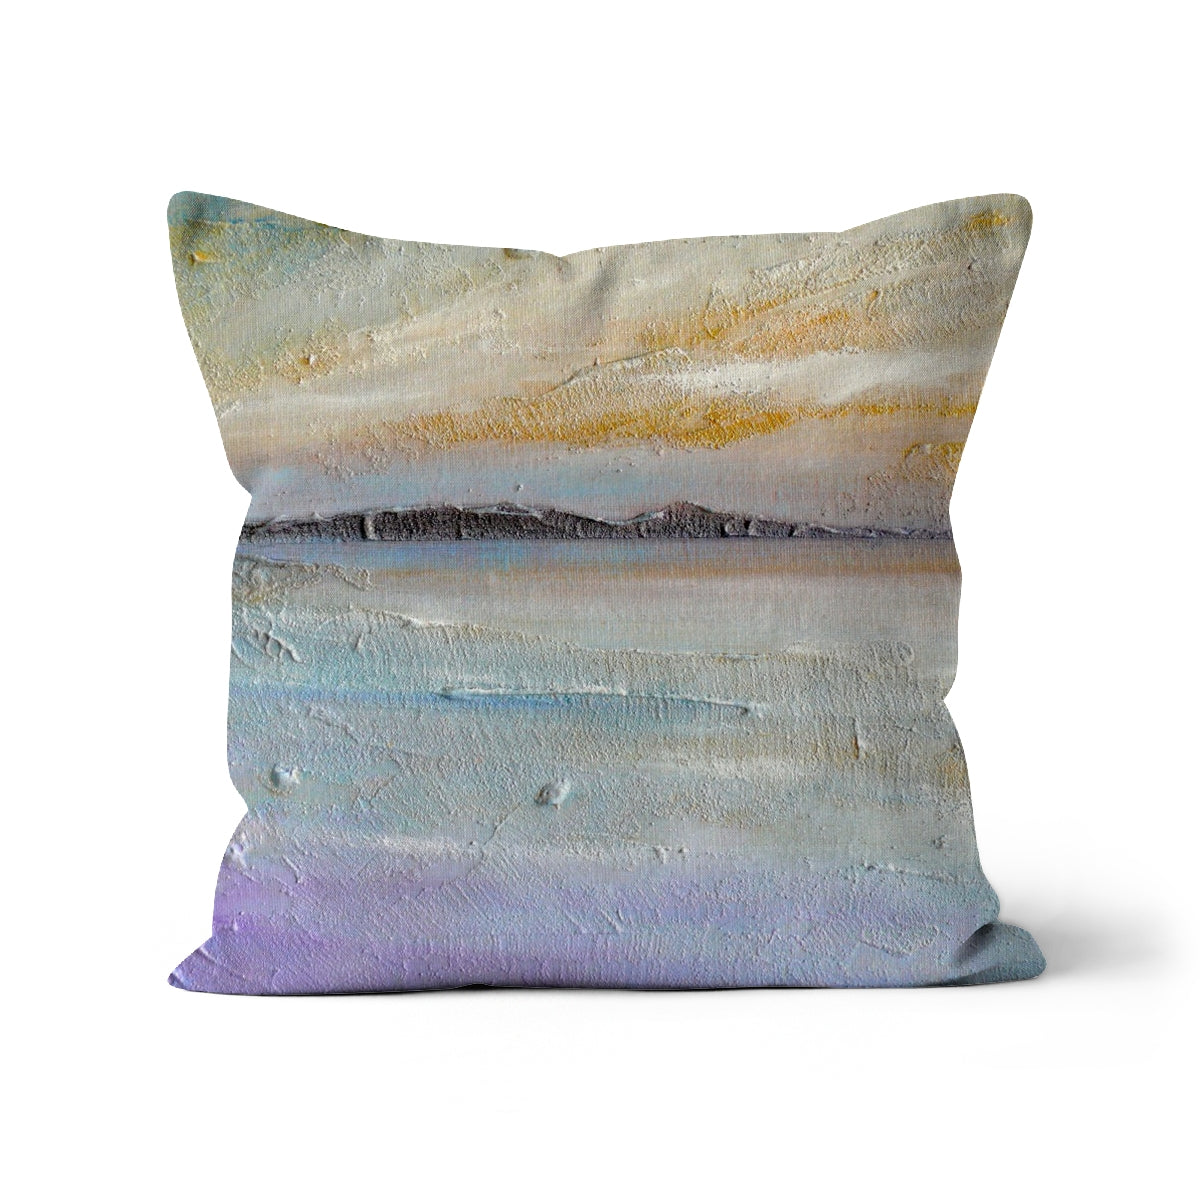 Sollas Beach South Uist Art Gifts Cushion-Cushions-Hebridean Islands Art Gallery-Canvas-24"x24"-Paintings, Prints, Homeware, Art Gifts From Scotland By Scottish Artist Kevin Hunter